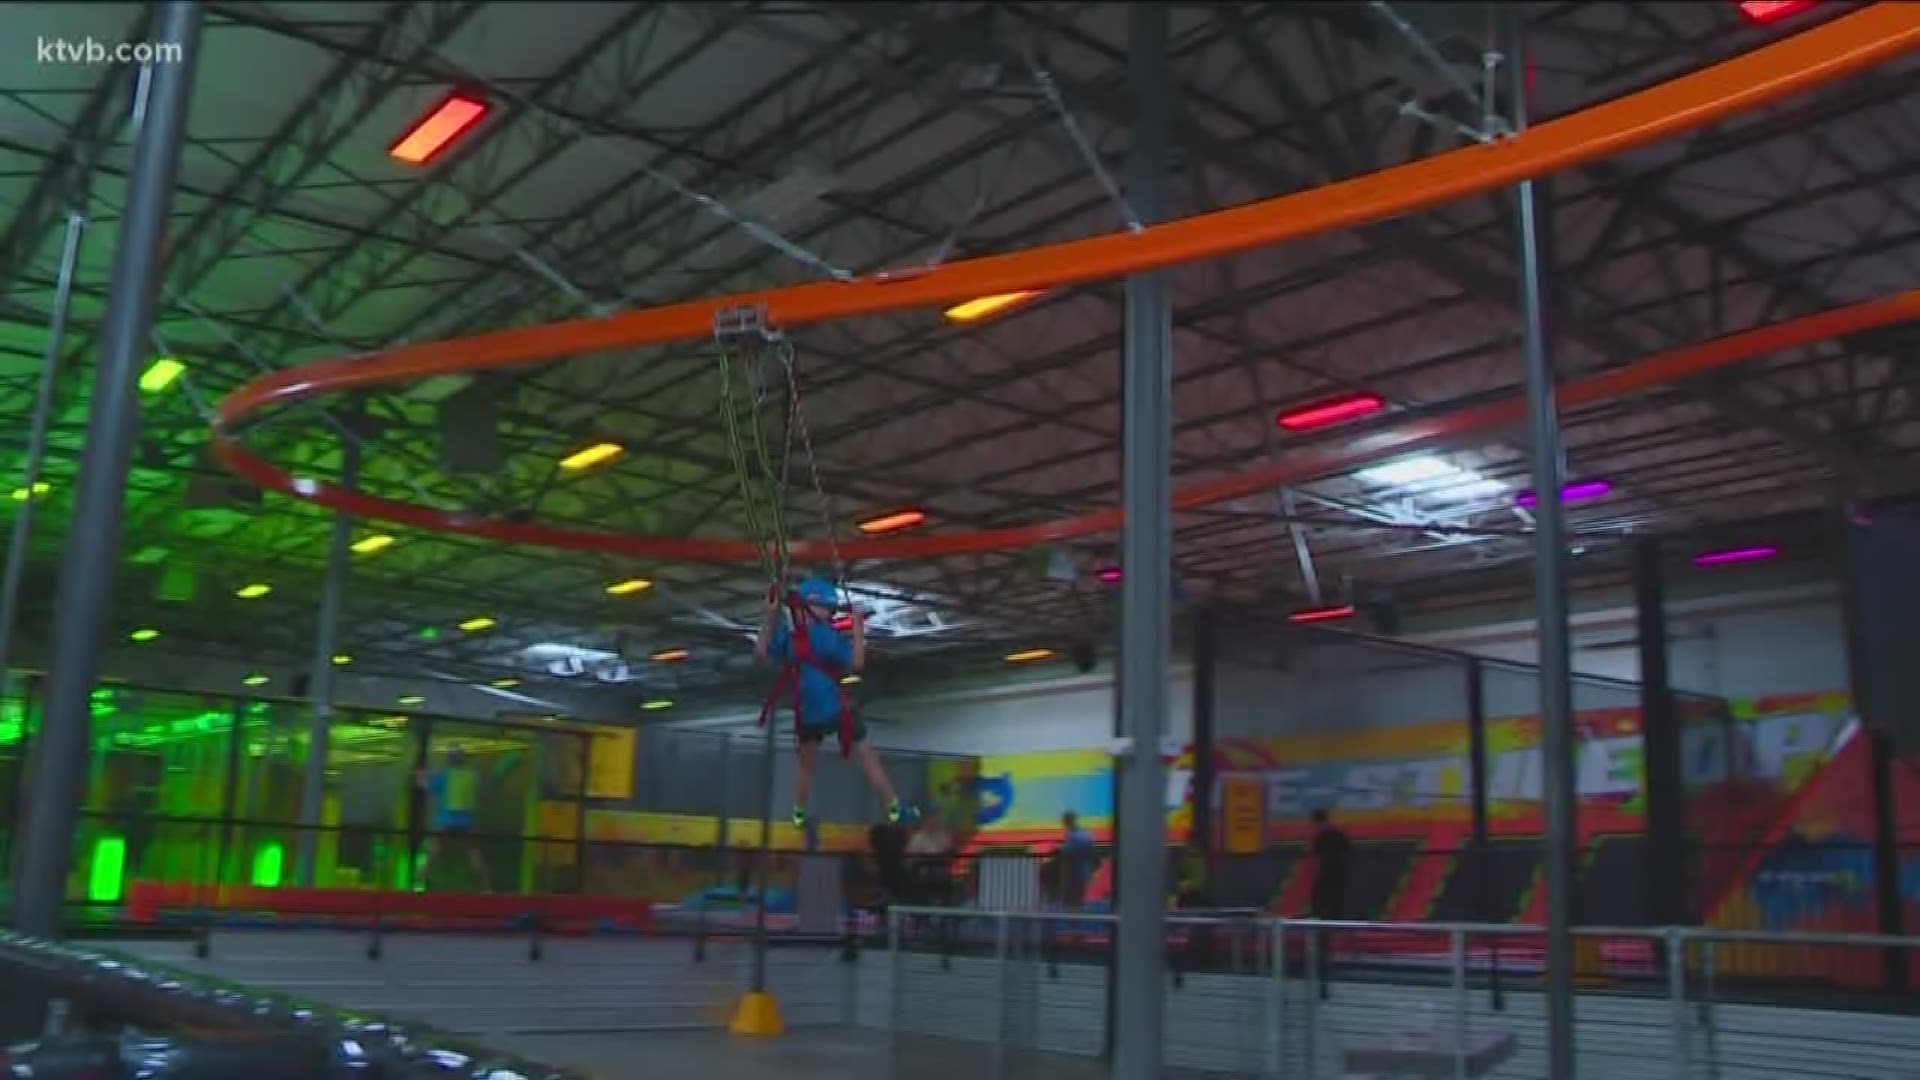 Urban Air Adventure Park helped kids celebrate the end of the school year with discounted passes, an offer that also helps Big Brothers Big Sisters of Southwest Idaho